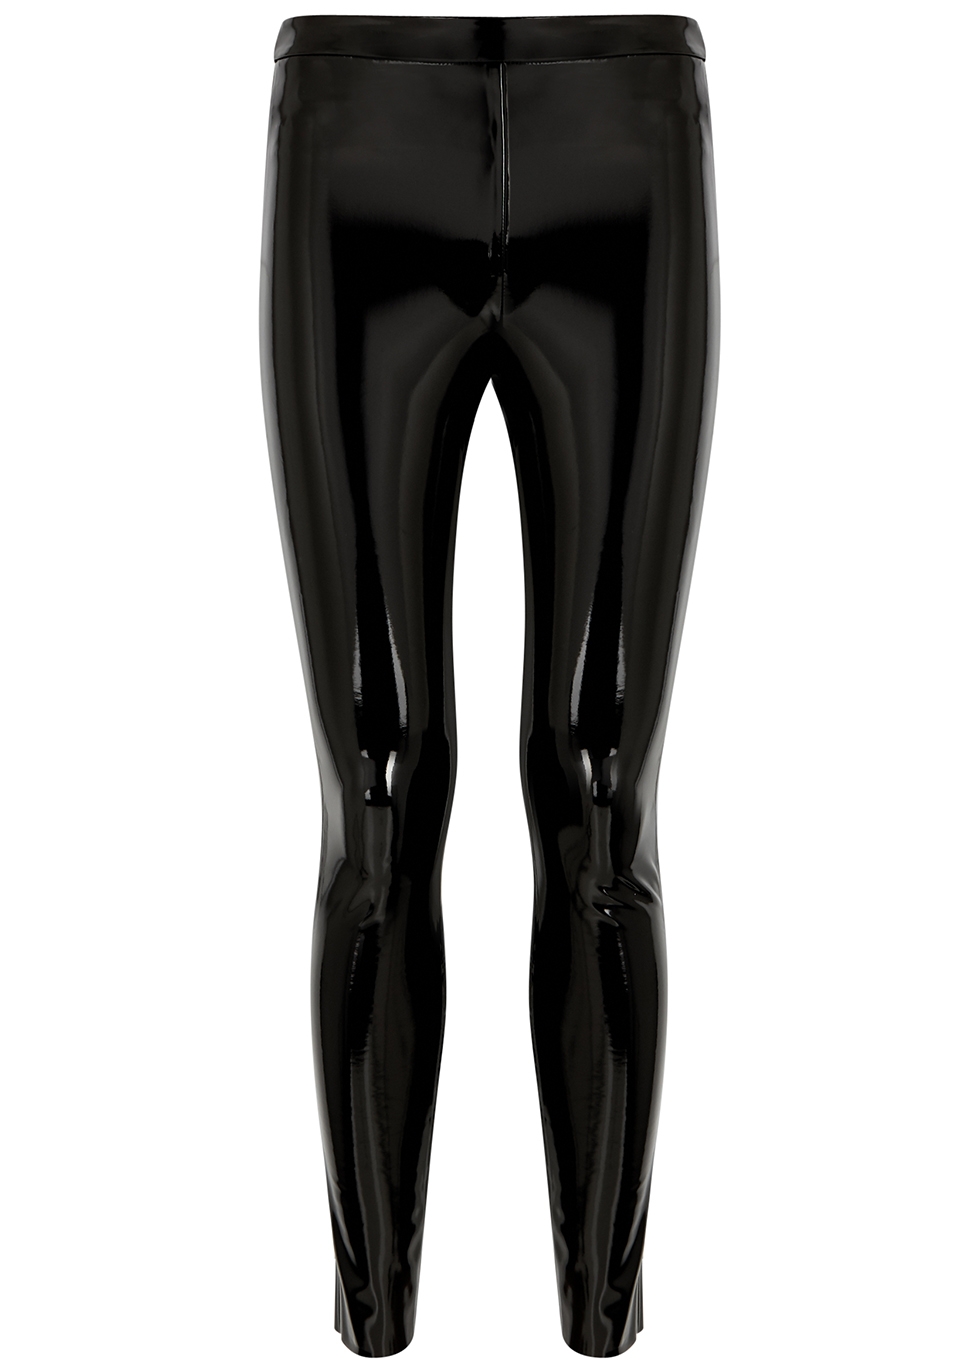 Alice + Olivia Outlet Maddox black patent faux leather leggings sale 59 ...